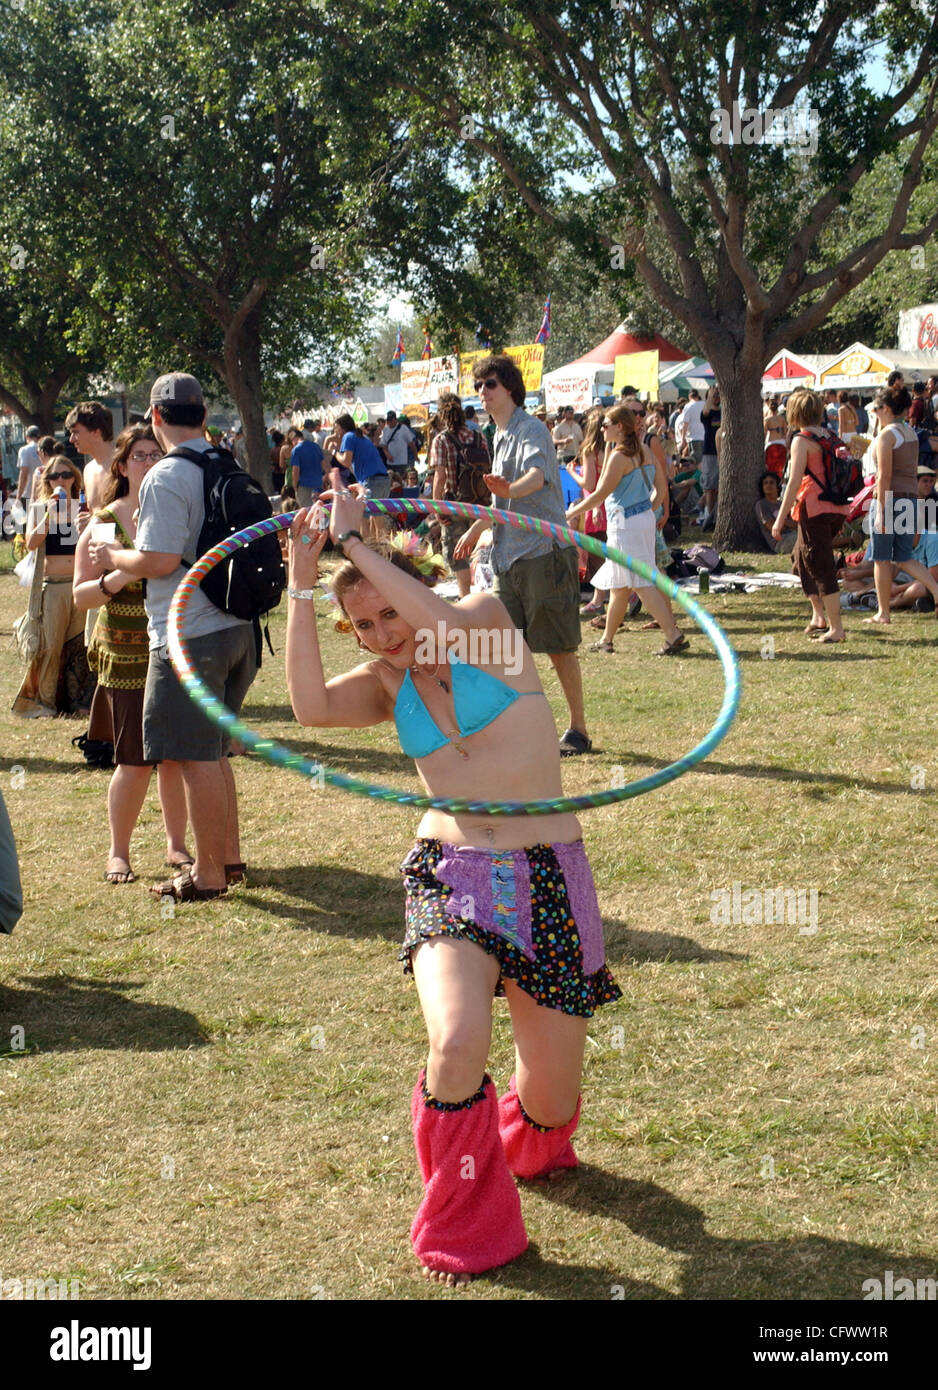 Mar. 9, 2007; Sunrise, FL., USA;  A fan turls a hula hupe at the 5th annual Langerado Music Festival that took place at Markham Park located in Sunrise.   Mandatory Credit: Photo by Jason Moore (©) Copyright 2007 by Jason Moore Stock Photo